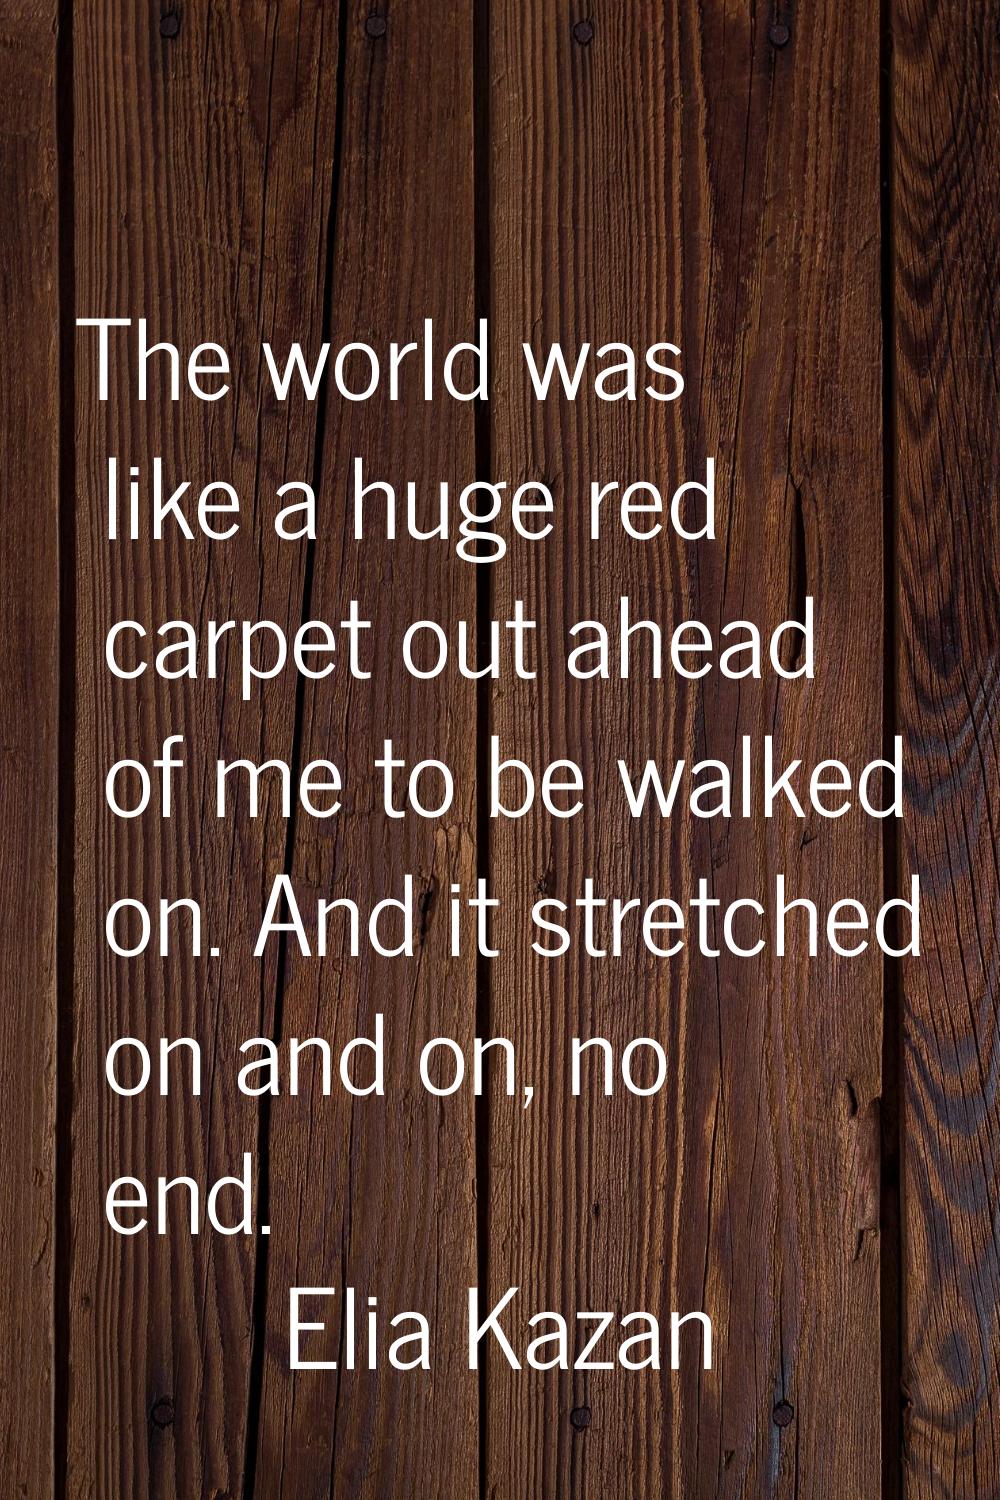 The world was like a huge red carpet out ahead of me to be walked on. And it stretched on and on, n